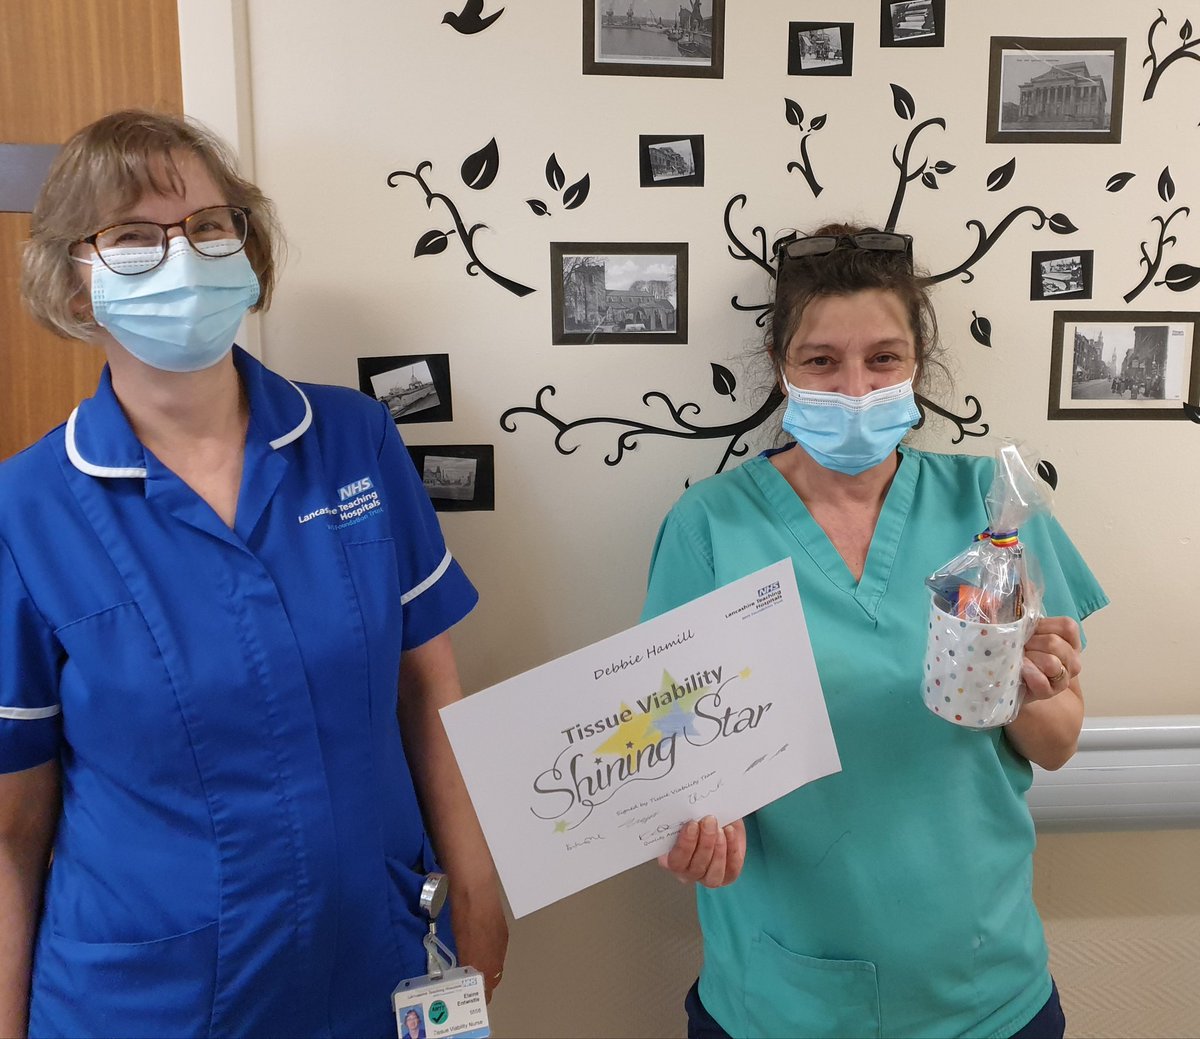 #TissueViabilityShiningStar for today. Well done to you both for supporting staff and patients on a daily basis. Keep up the good work. @ashjj999 @katebamber2606 @D19Kathryn @CatherineSilco1 @SarahC_RN